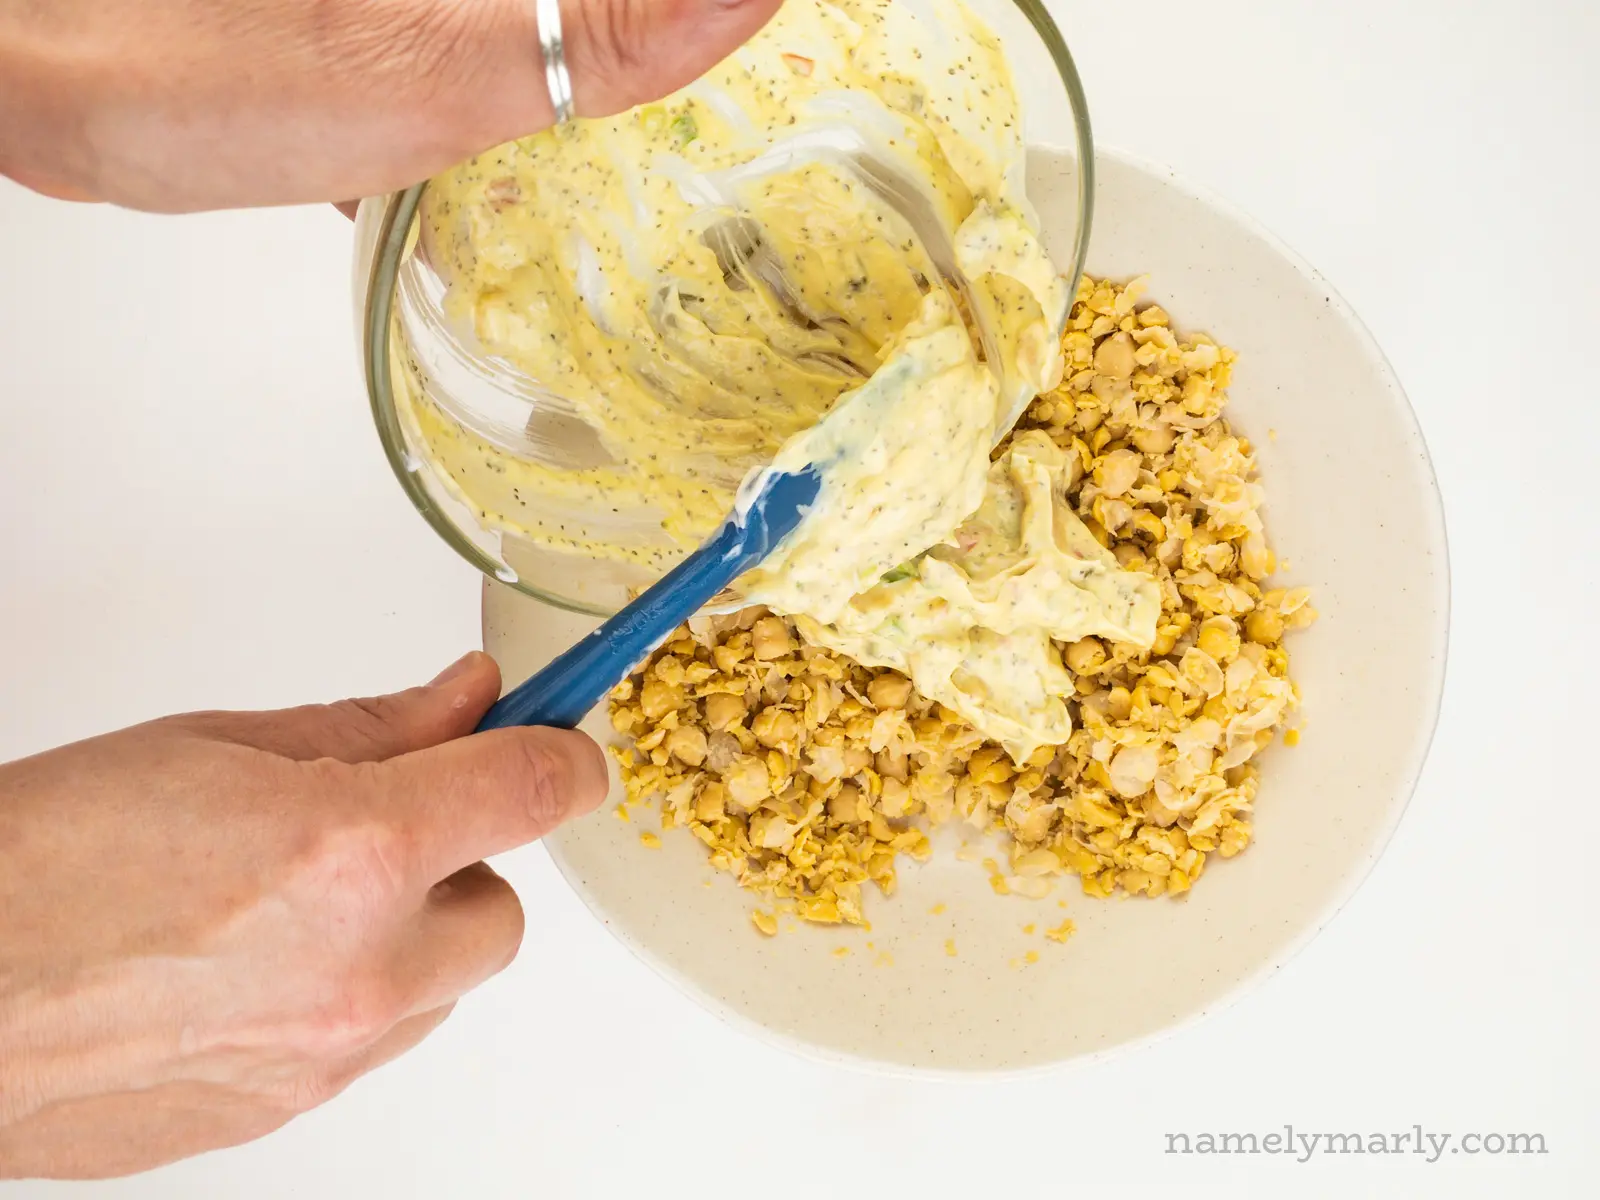 A hand holds a glass bowl over mashed chickpeas and uses a spatula in the other hand to spread it over the chickpeas.